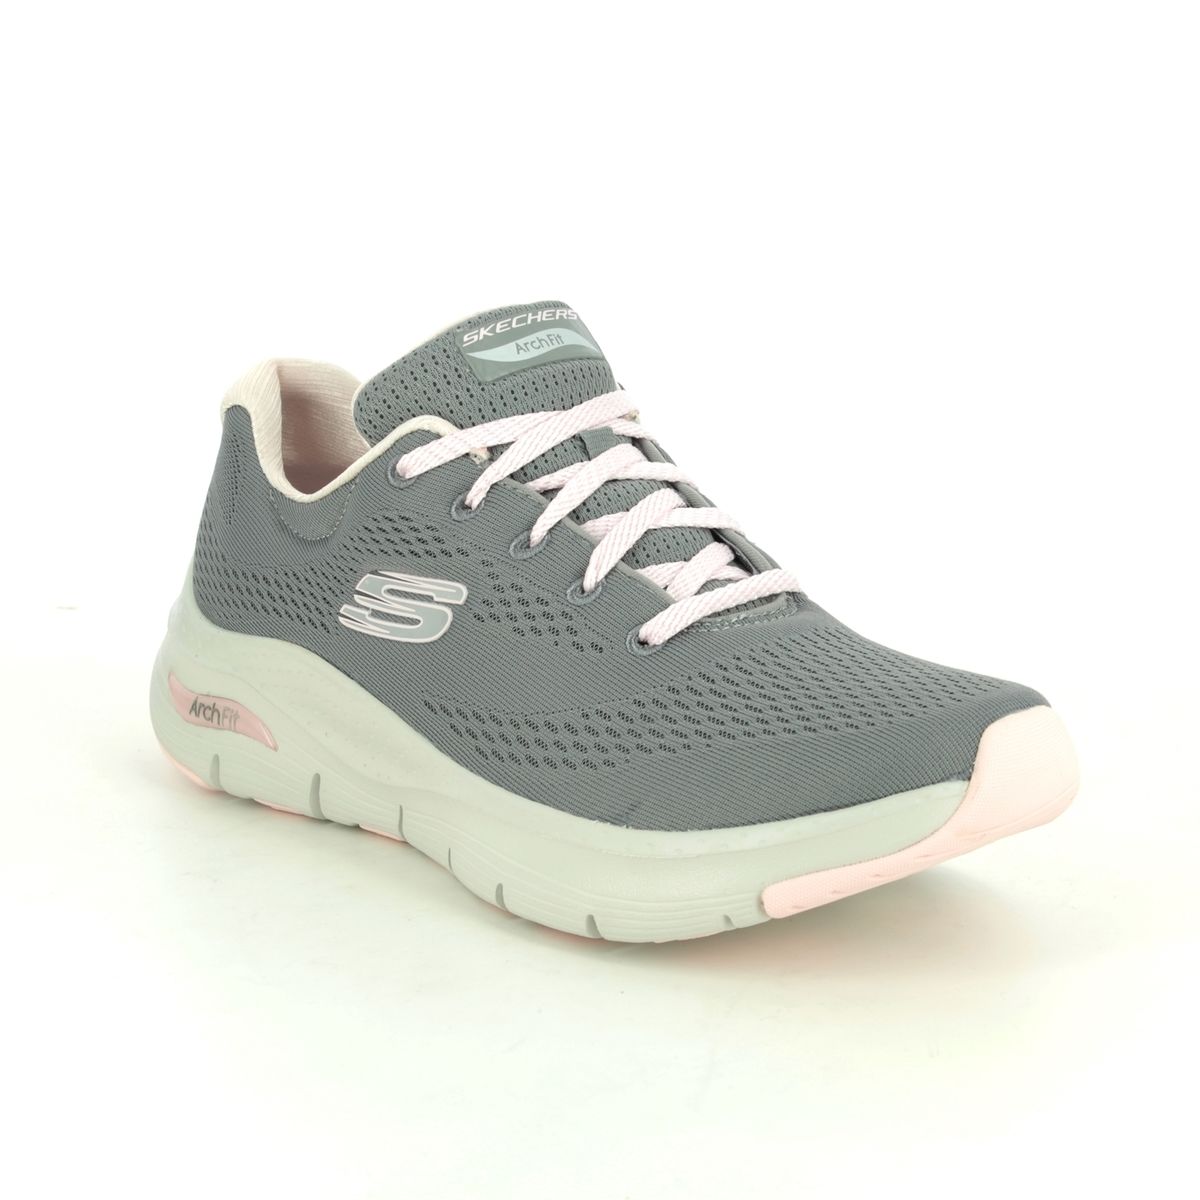 Skechers Appeal Arch Fit 149057 GYPK Grey croc trainers